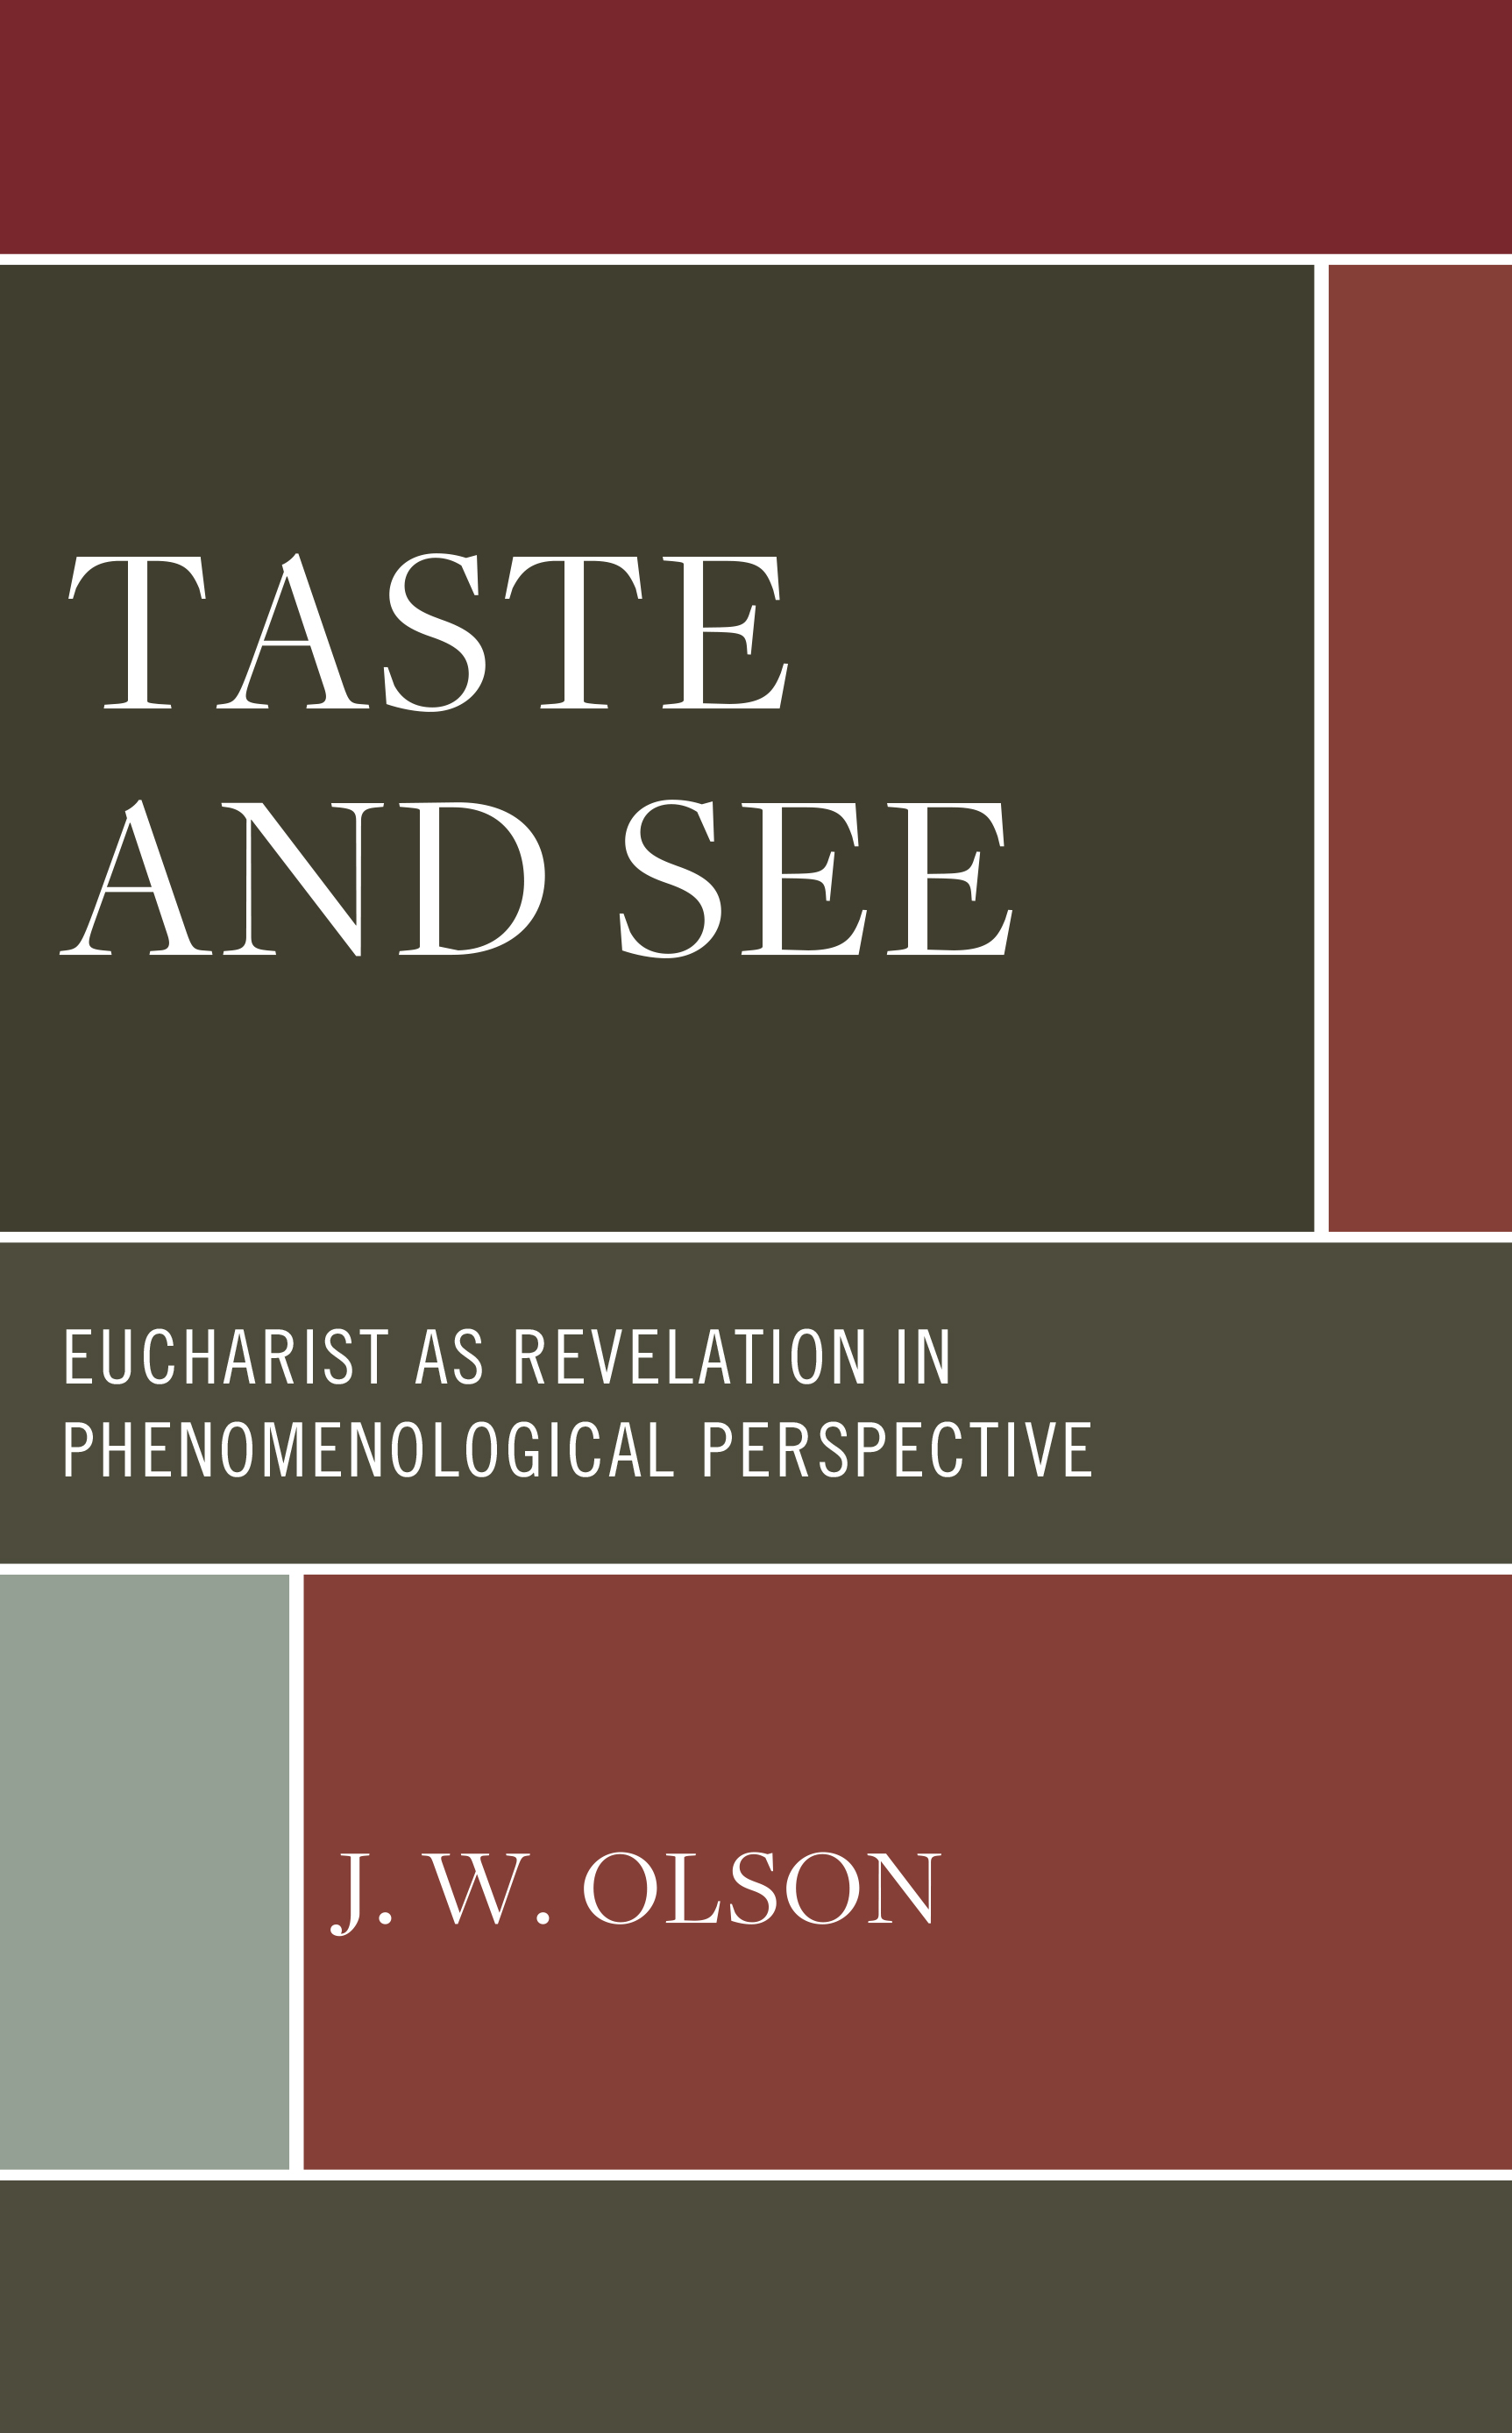 Taste and See: Eucharist as Revelation in Phenomenological Perspective